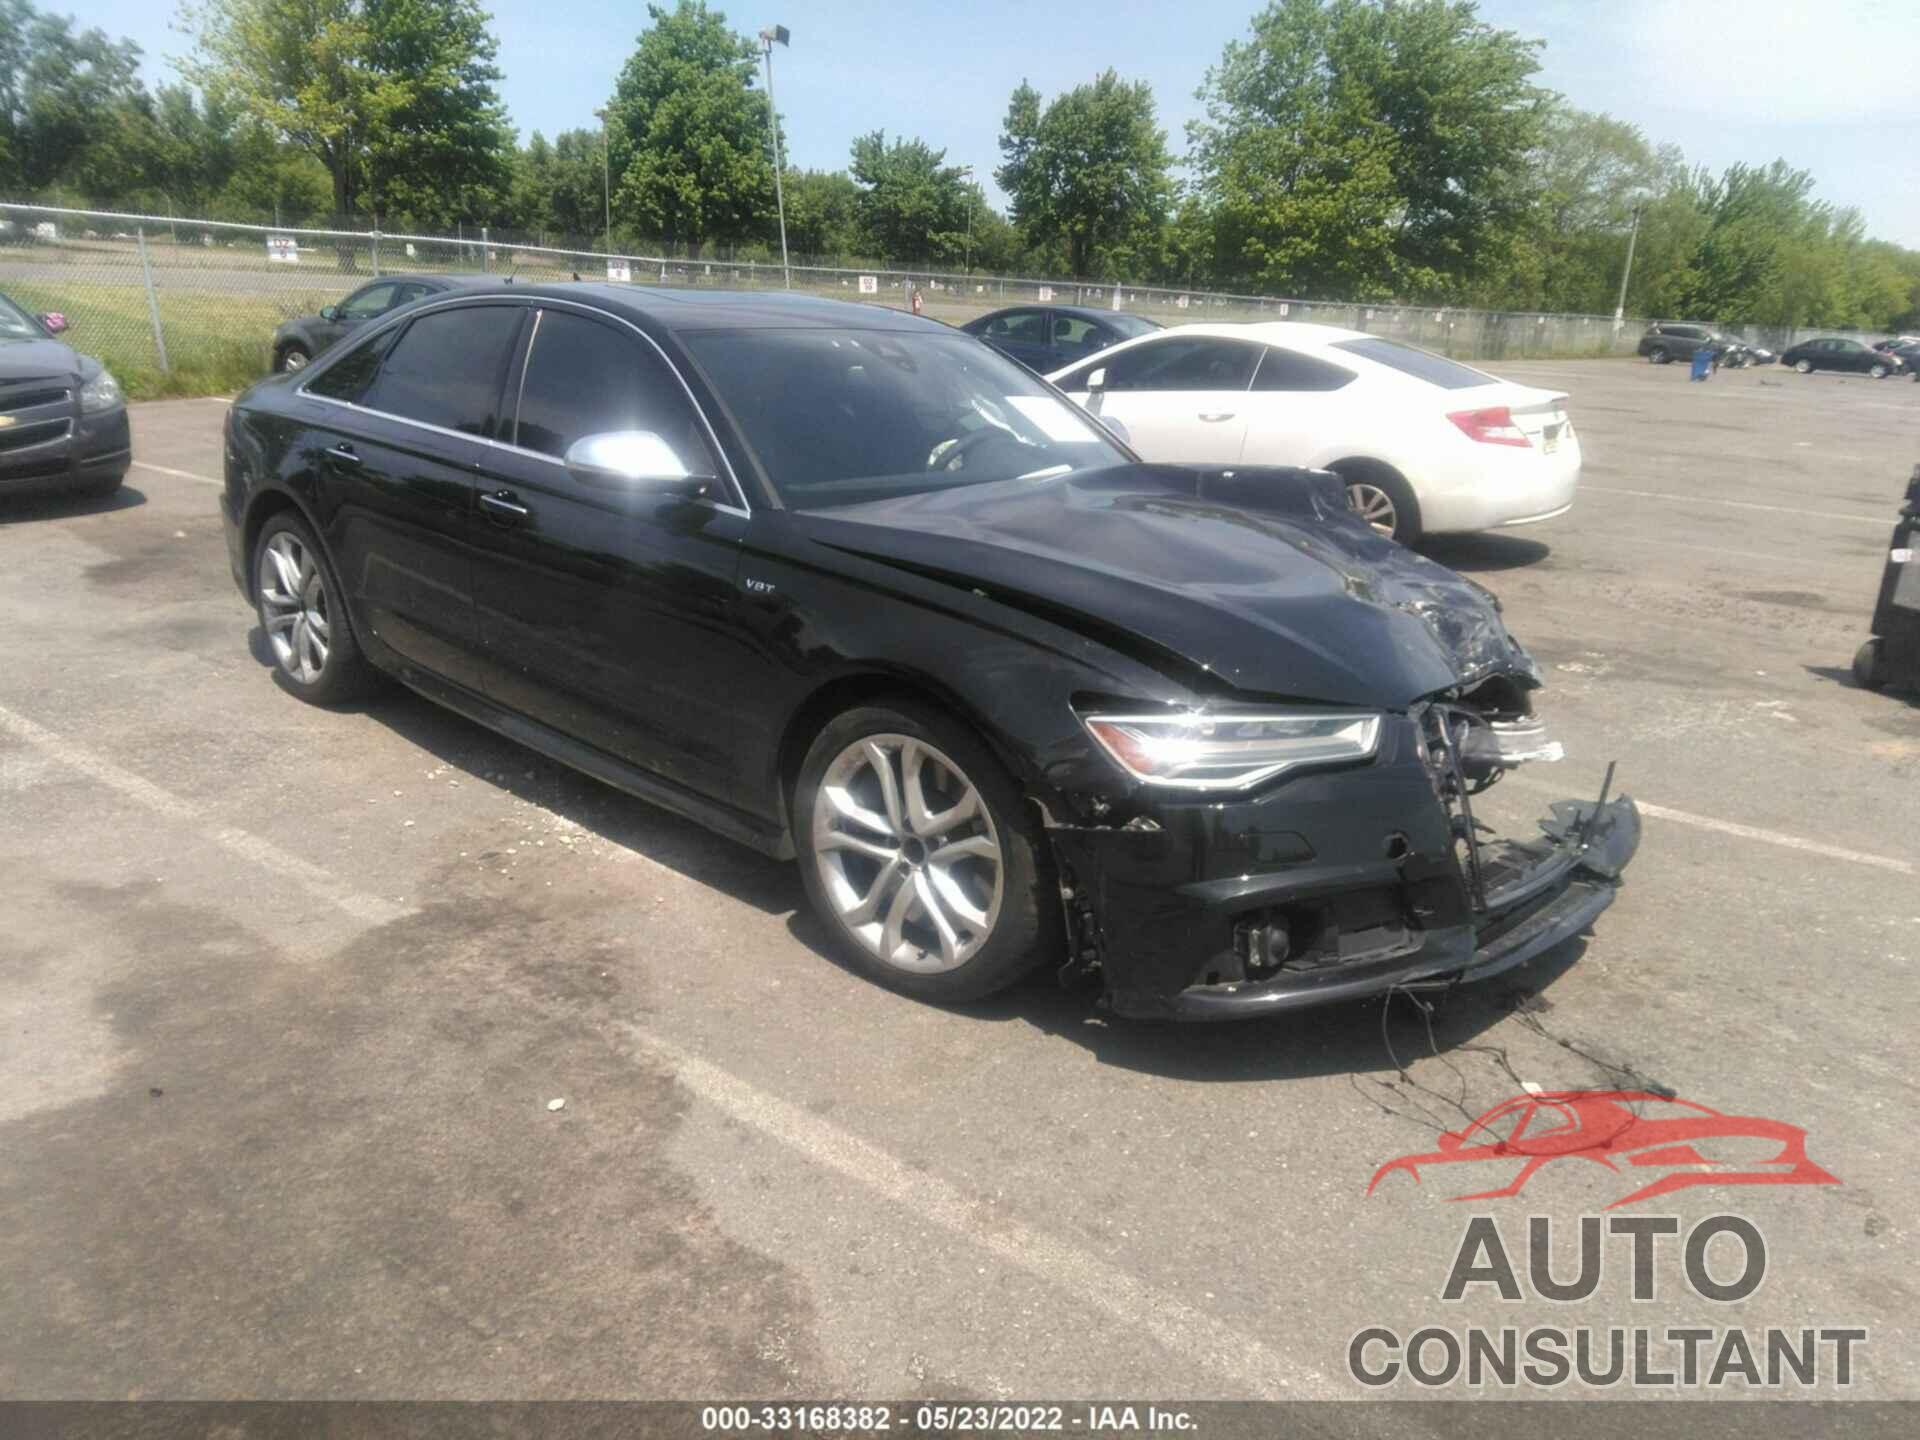 AUDI S6 2016 - WAUF2AFC8GN078130